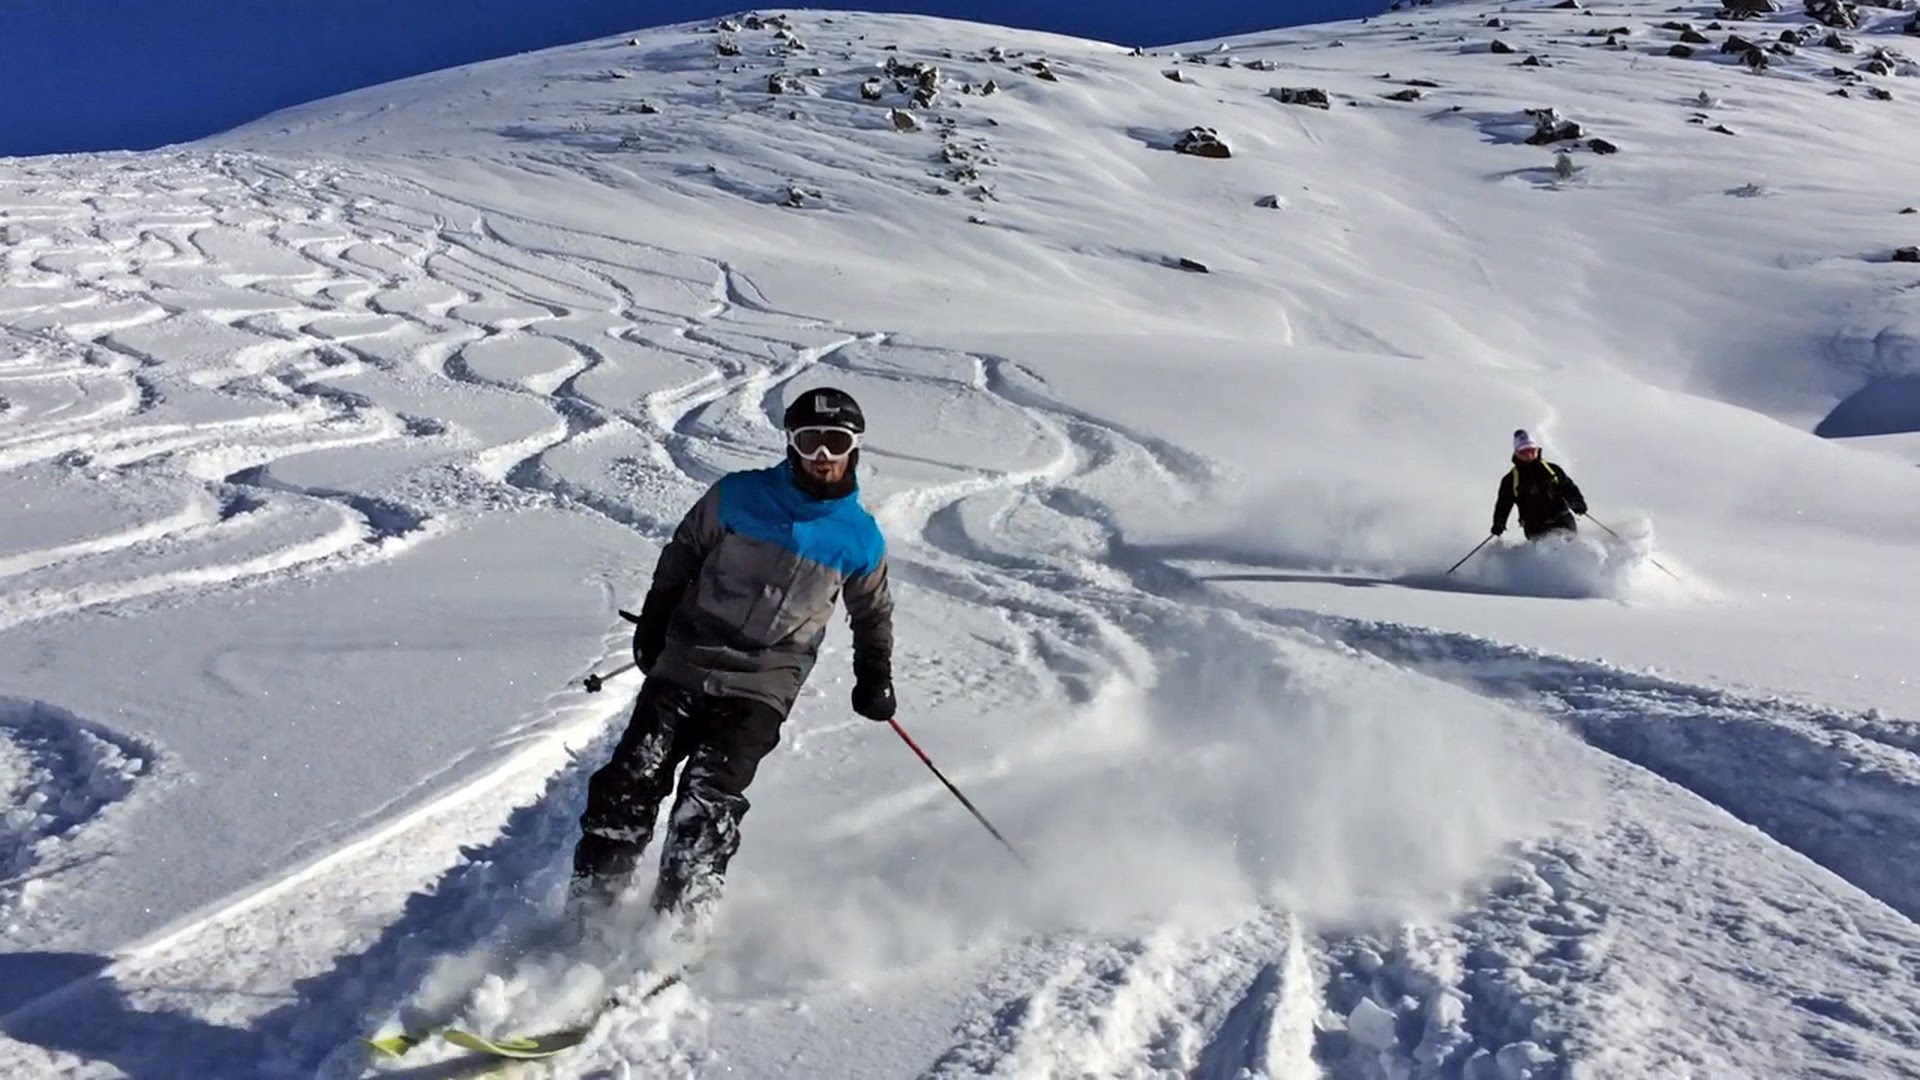 SKIING THE FRENCH ALPS - YouTube